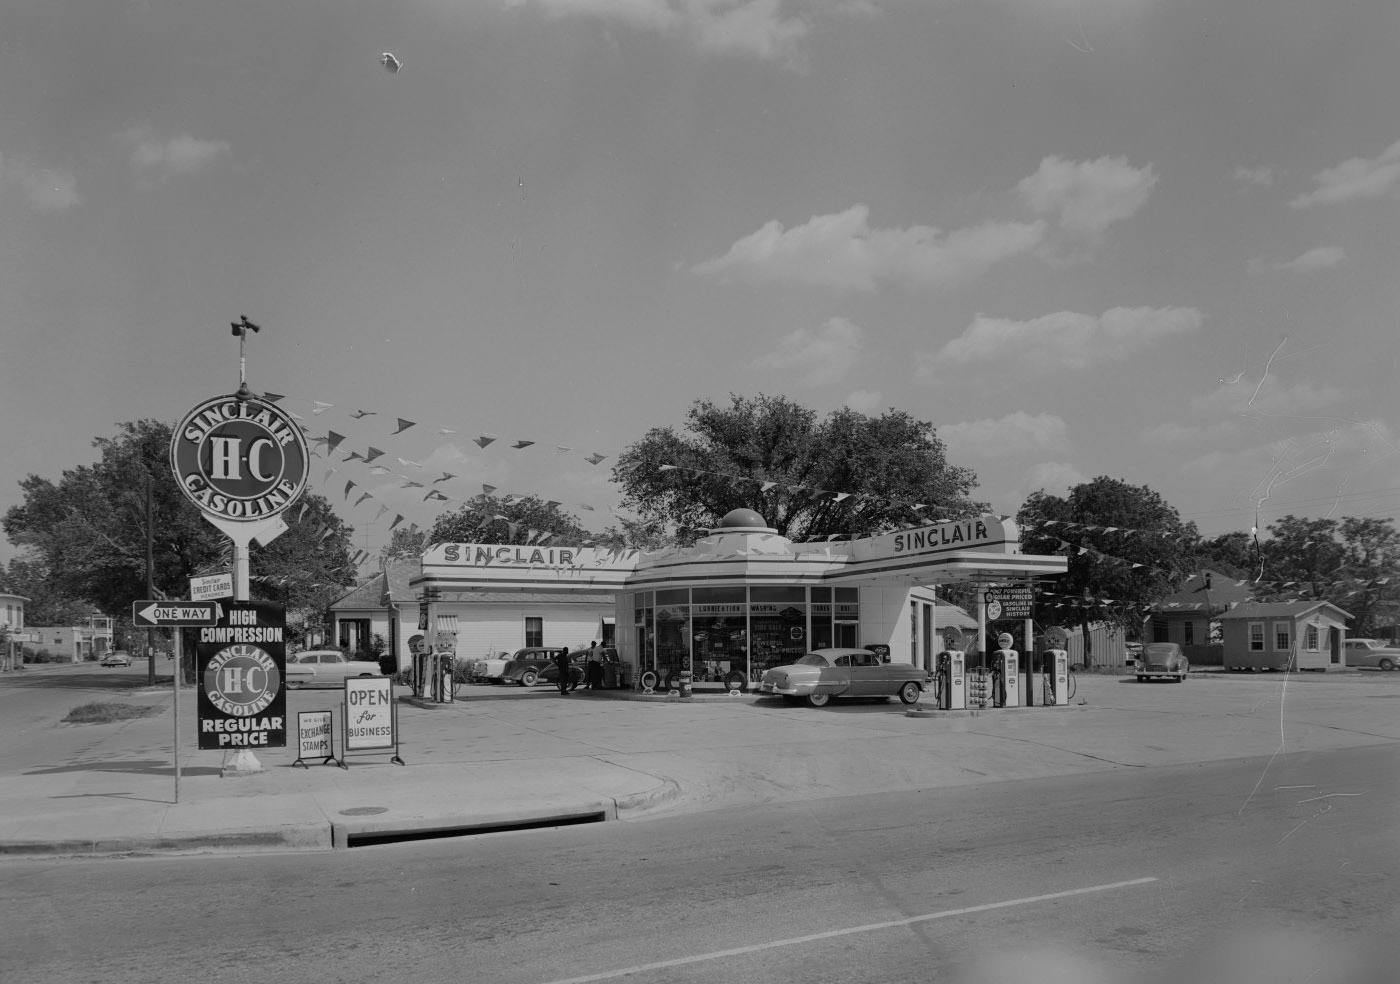 Sinclair Stations, Exterior at 801 E. 1st St. With 3 Men and Parked Cars, 1955.